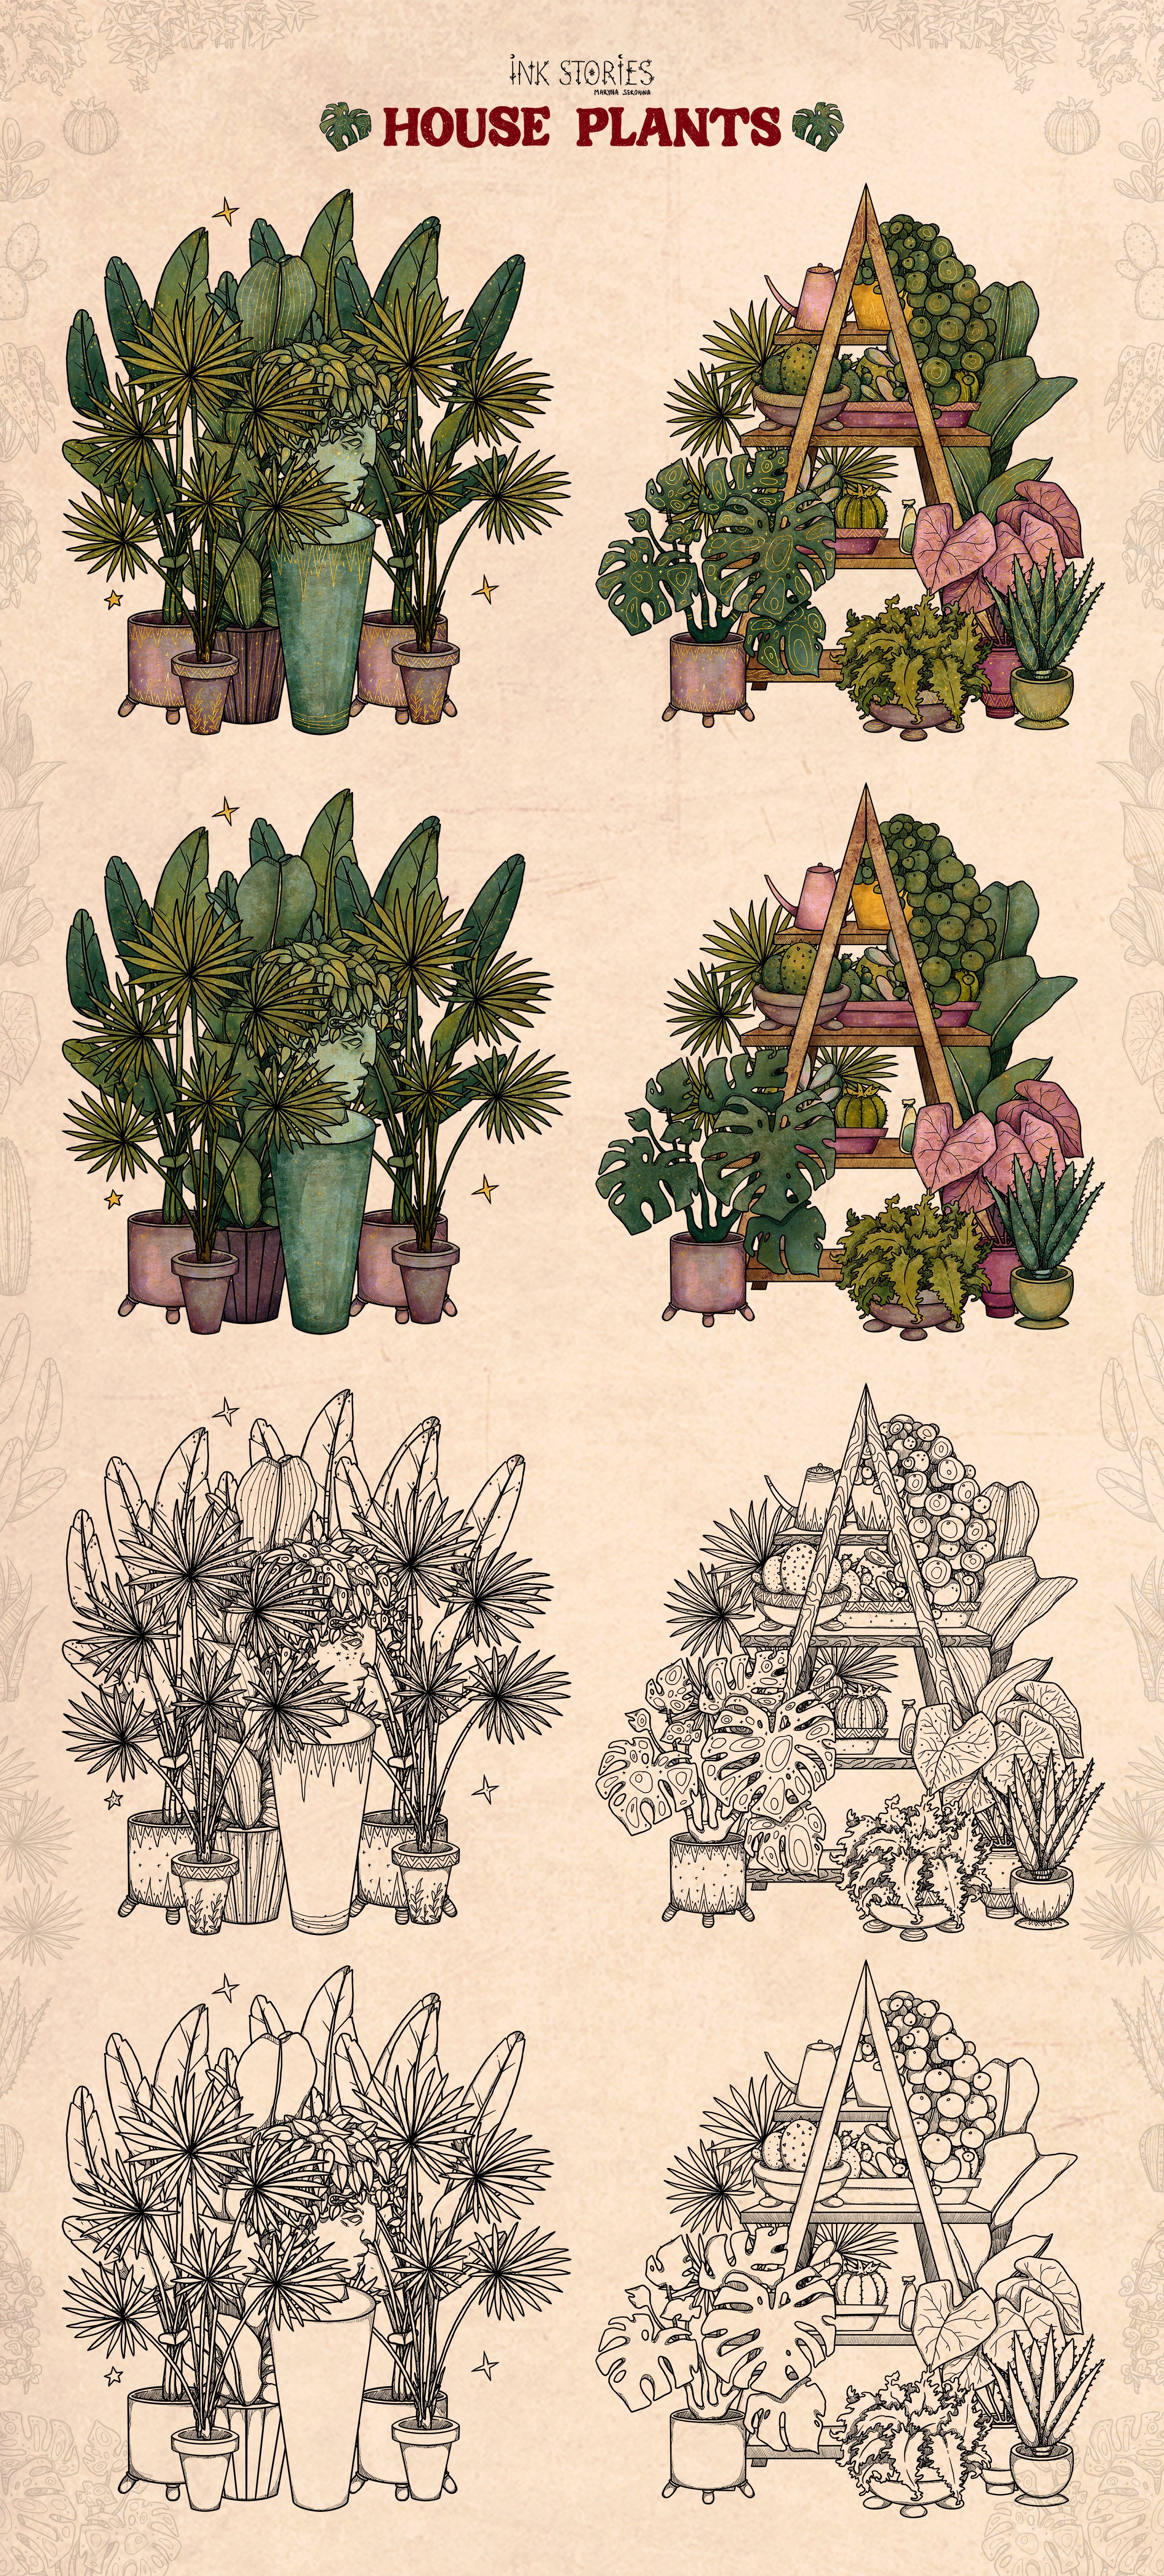 Drawing of a variety of house plants.